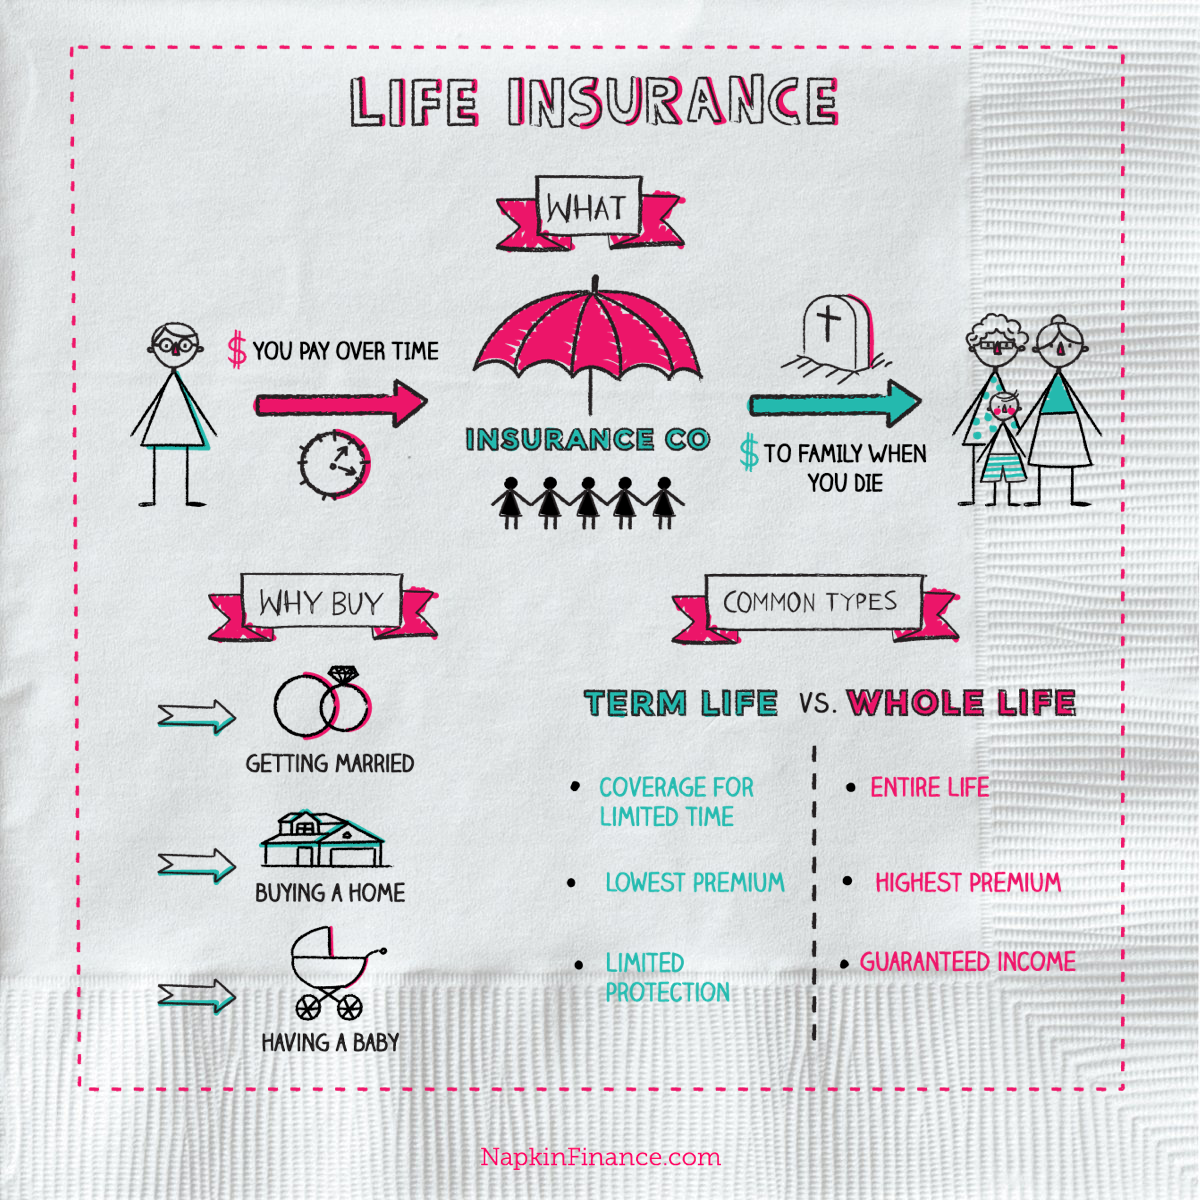 Definitions - Whole Vs Term Life